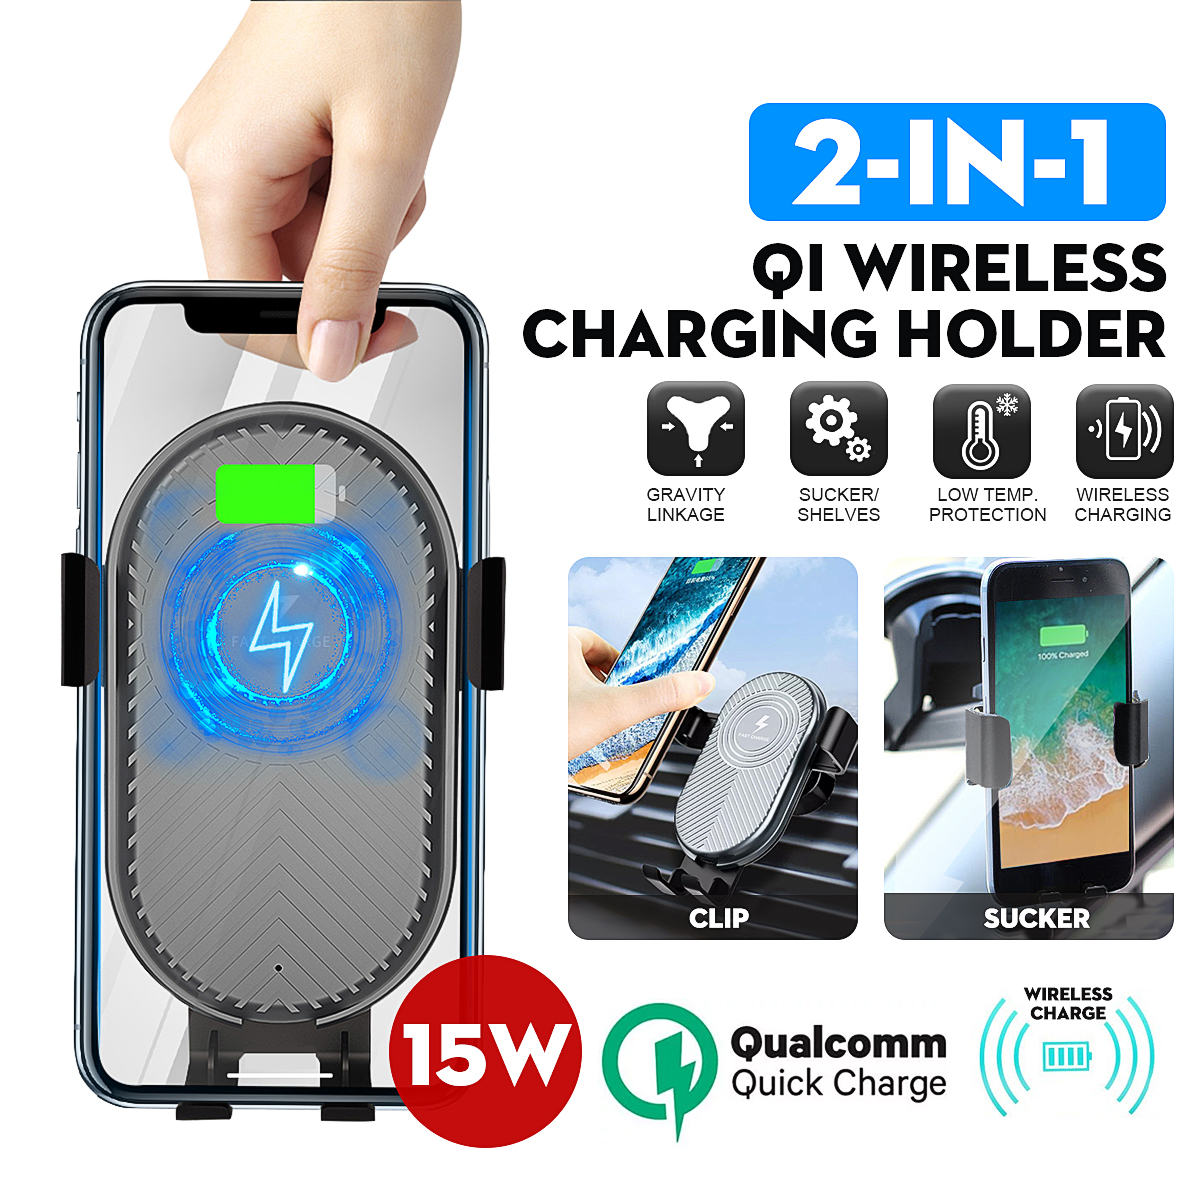 15W-Qi-Wireless-Charger-Fast-Charging-Gravity-Linkage-Air-Vent-Car-Phone-Holder-For-40-65-Inch-Smart-1572801-2